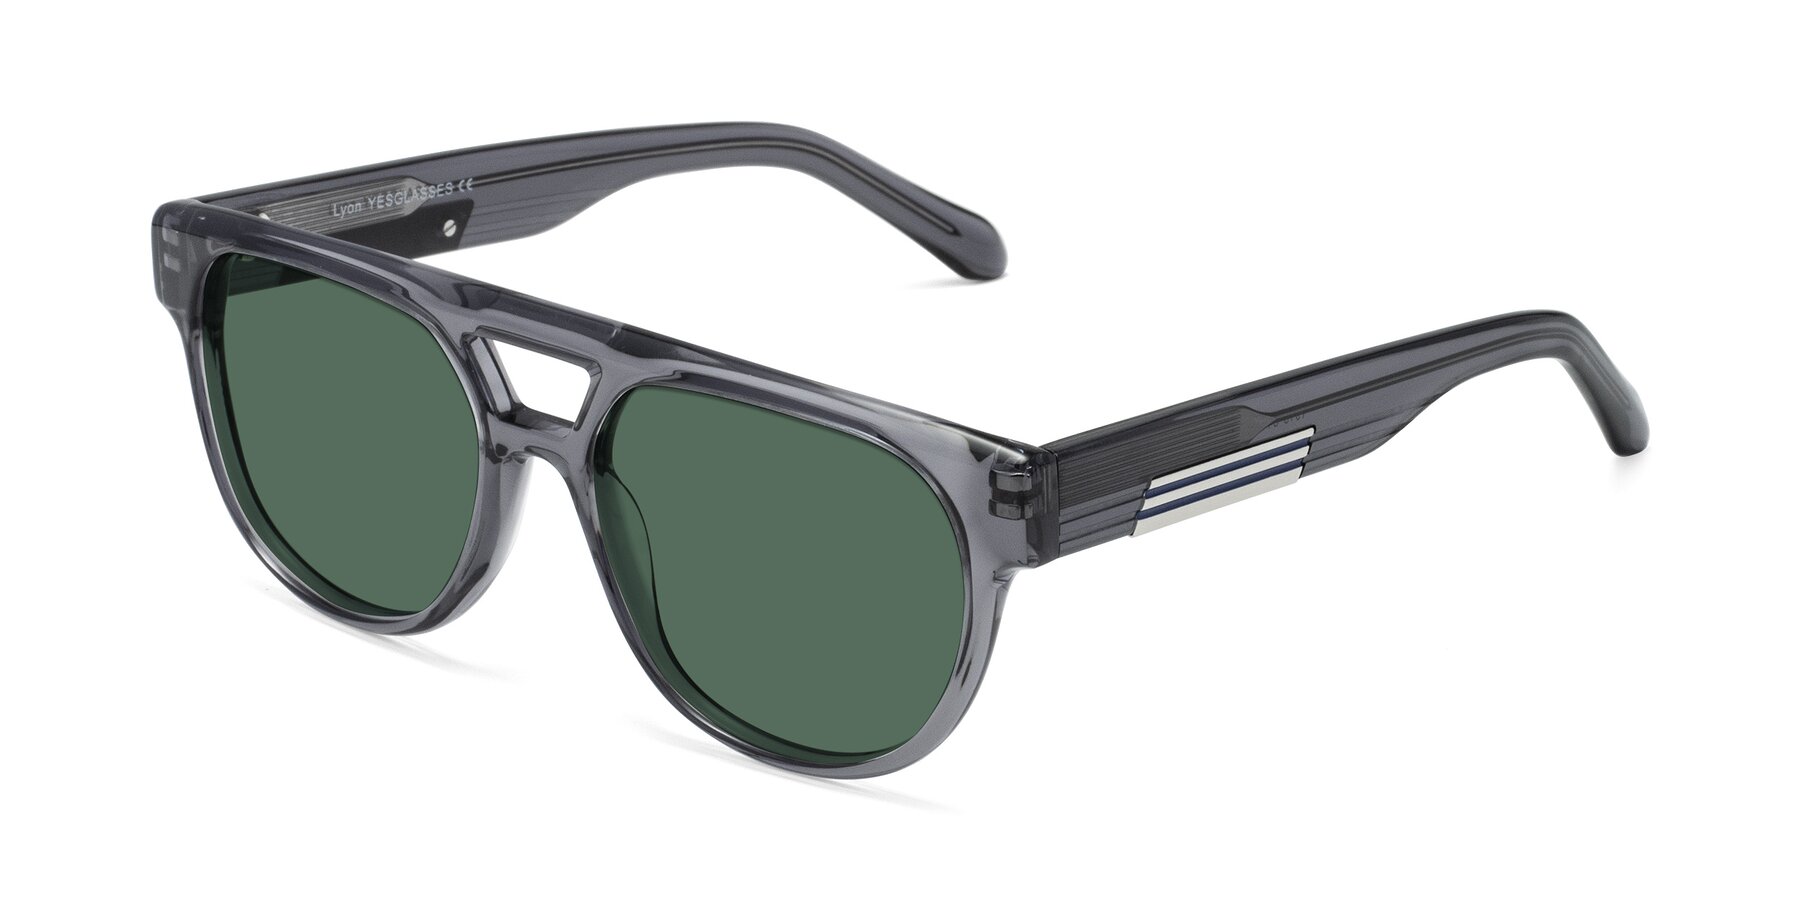 Angle of Lyon in Dim Gray with Green Polarized Lenses